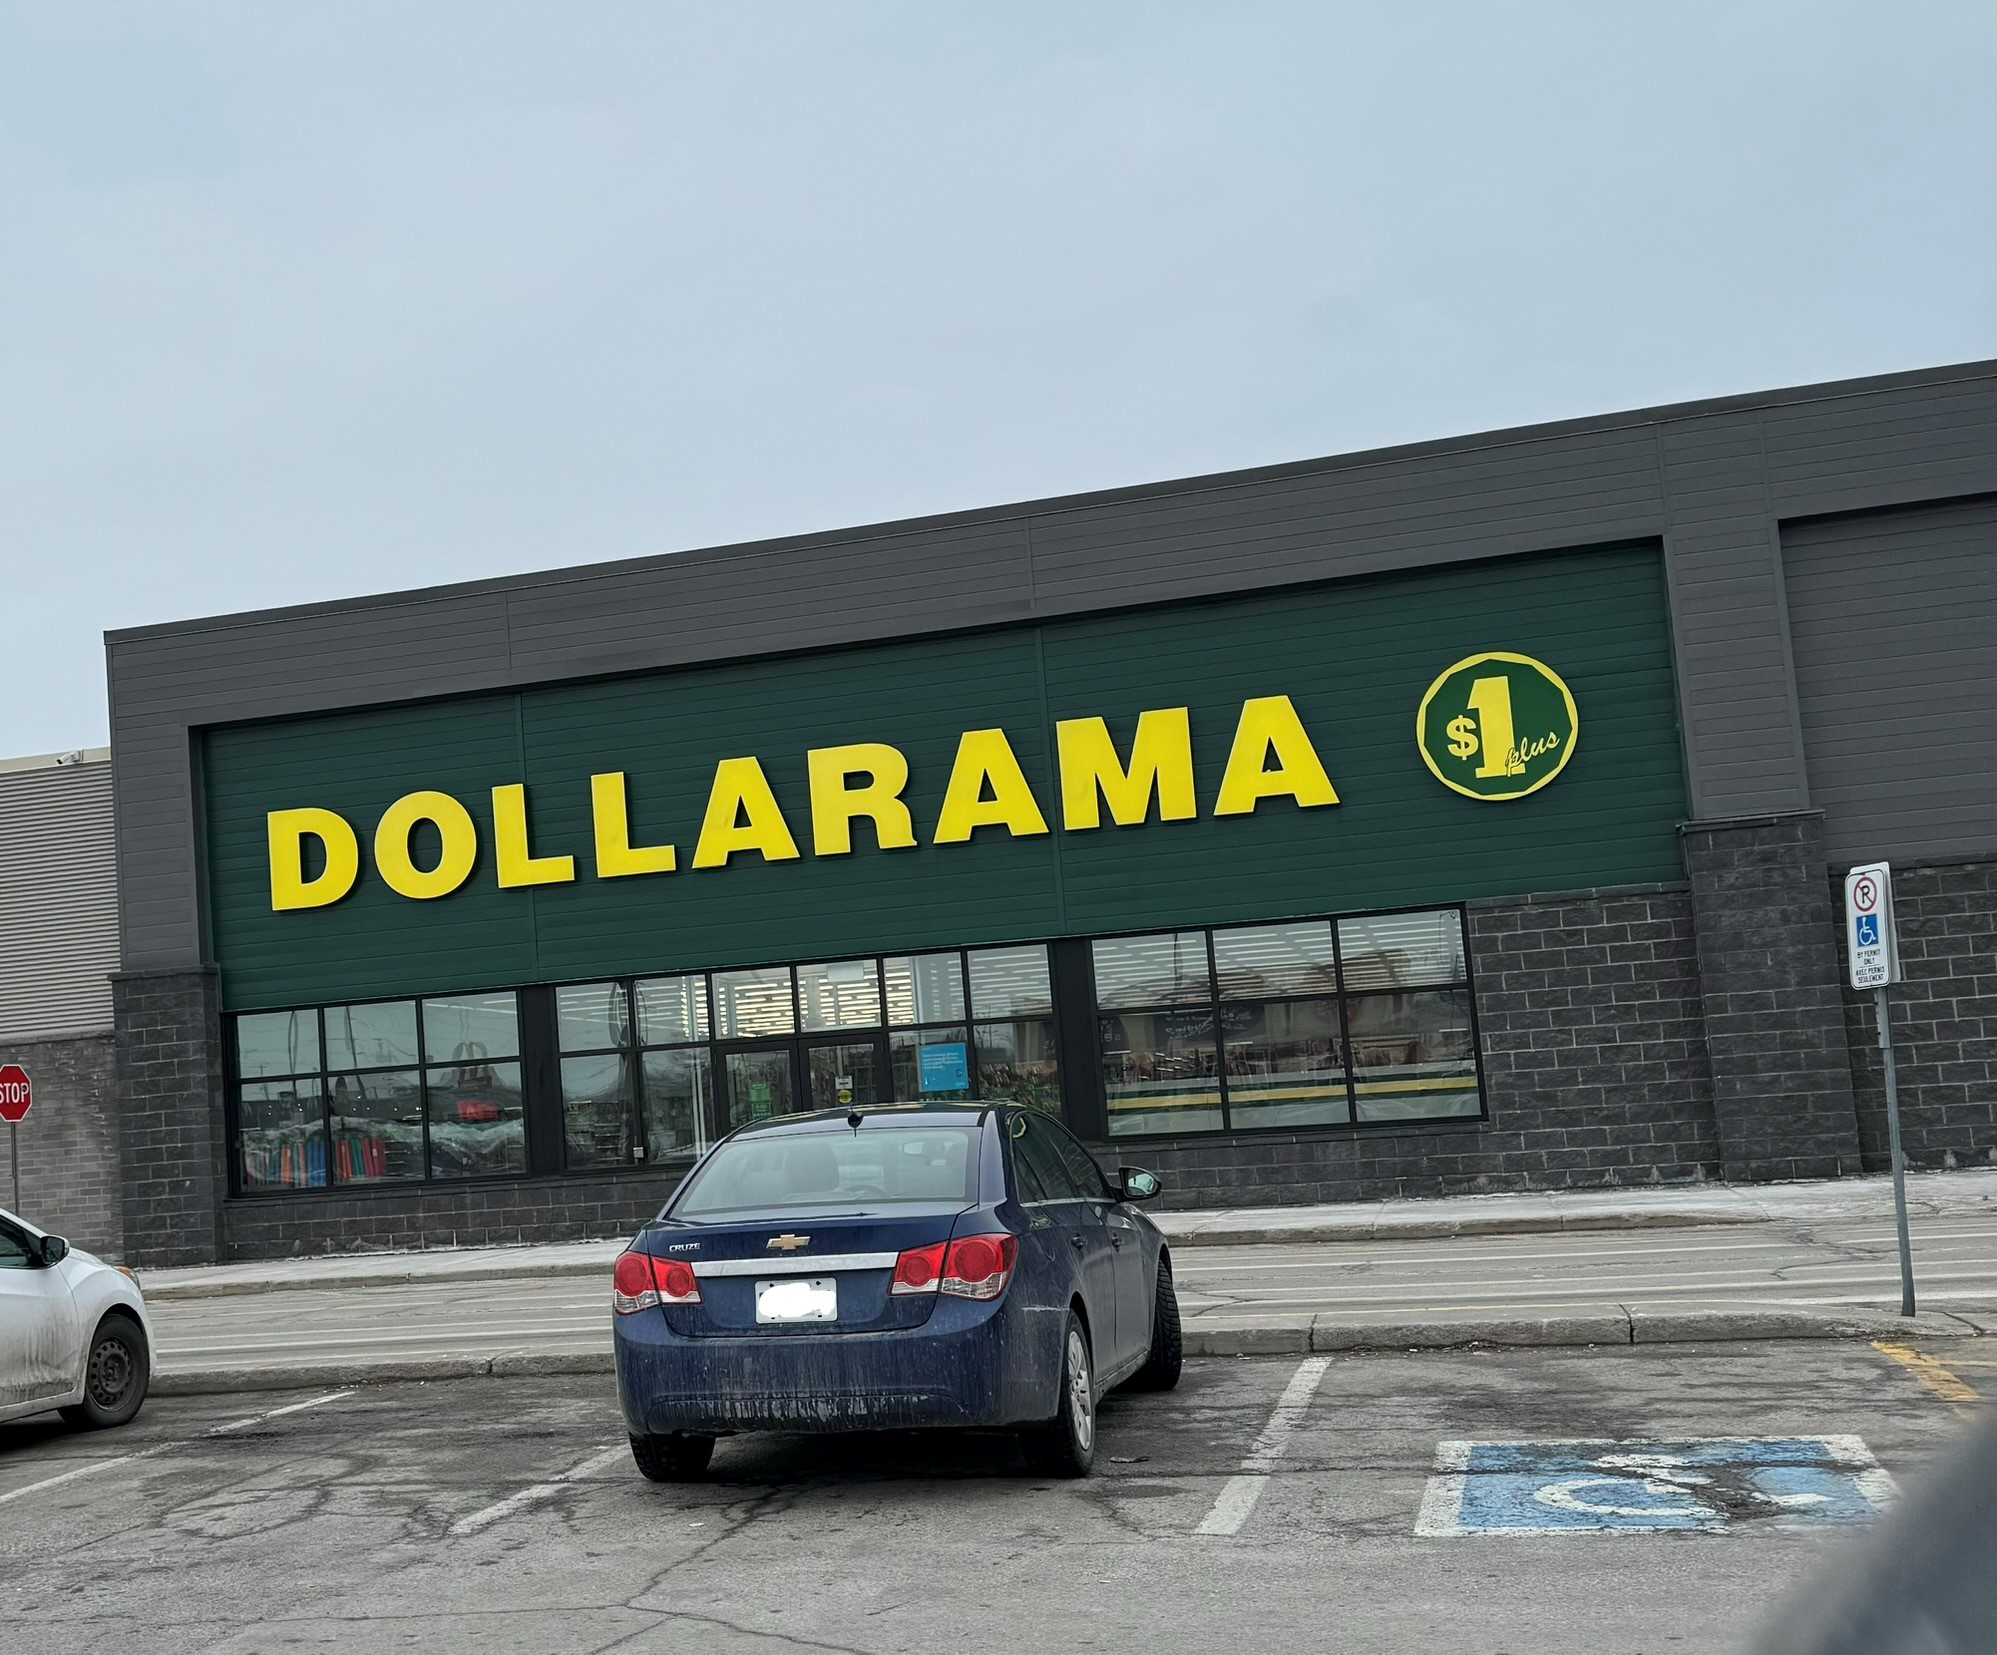 You could be entitled to a free gift card from Dollarama!